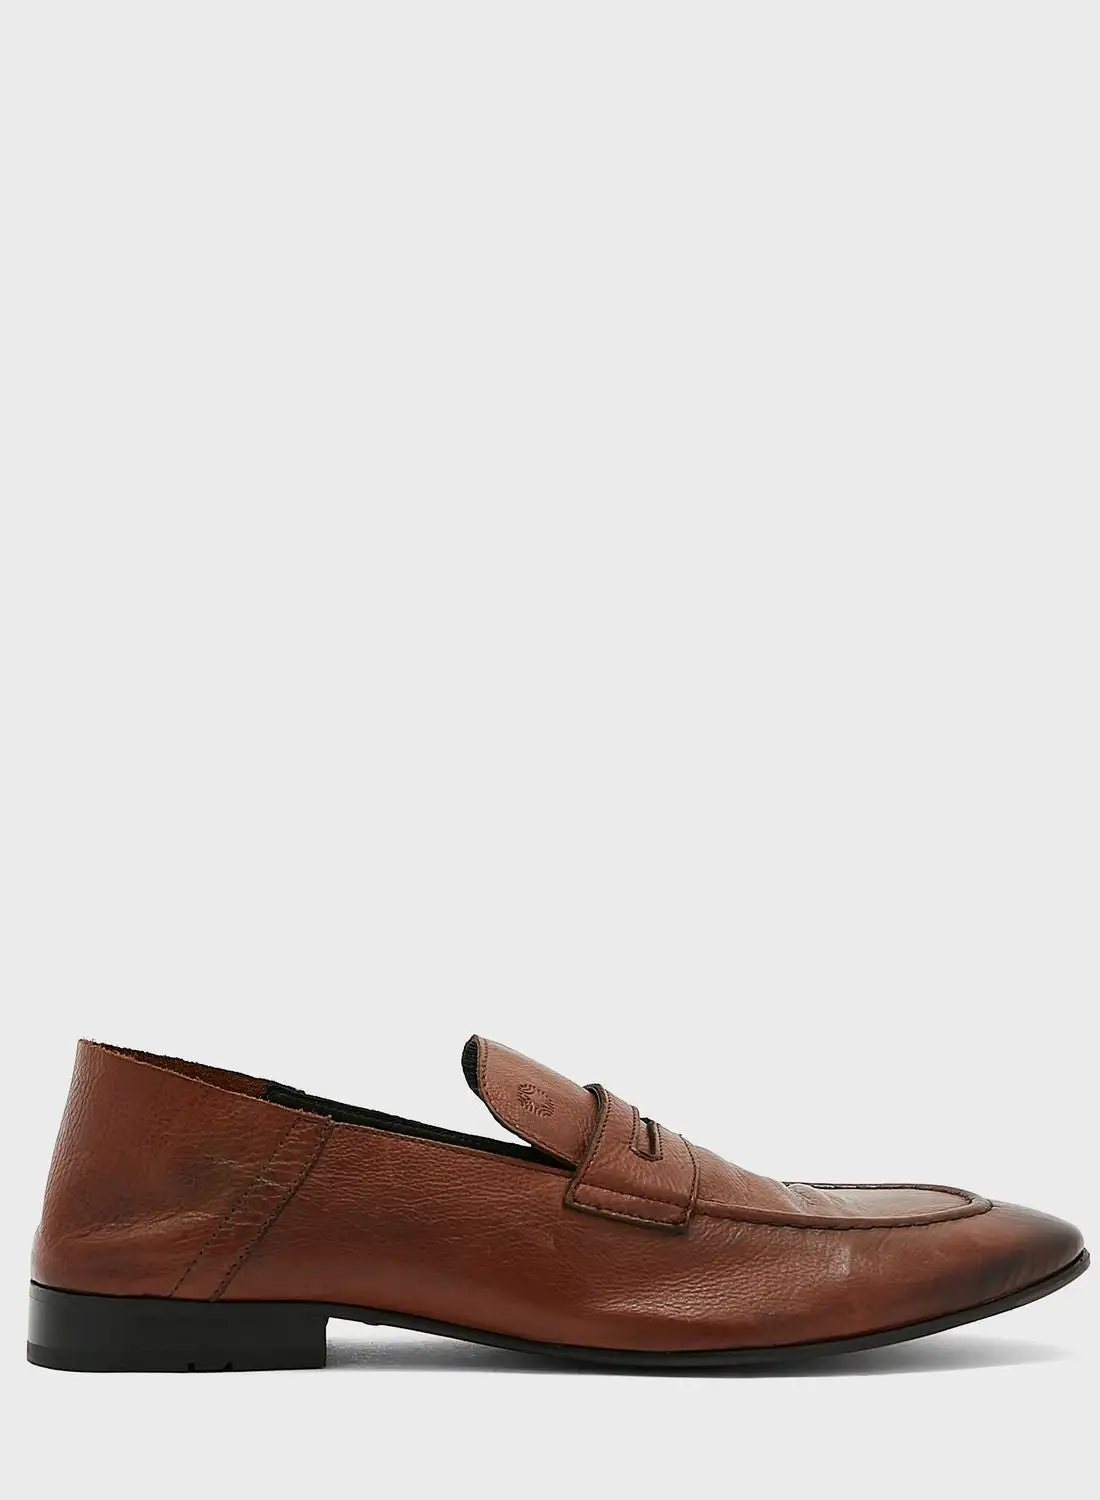 RUOSH Casual Slip On Shoes